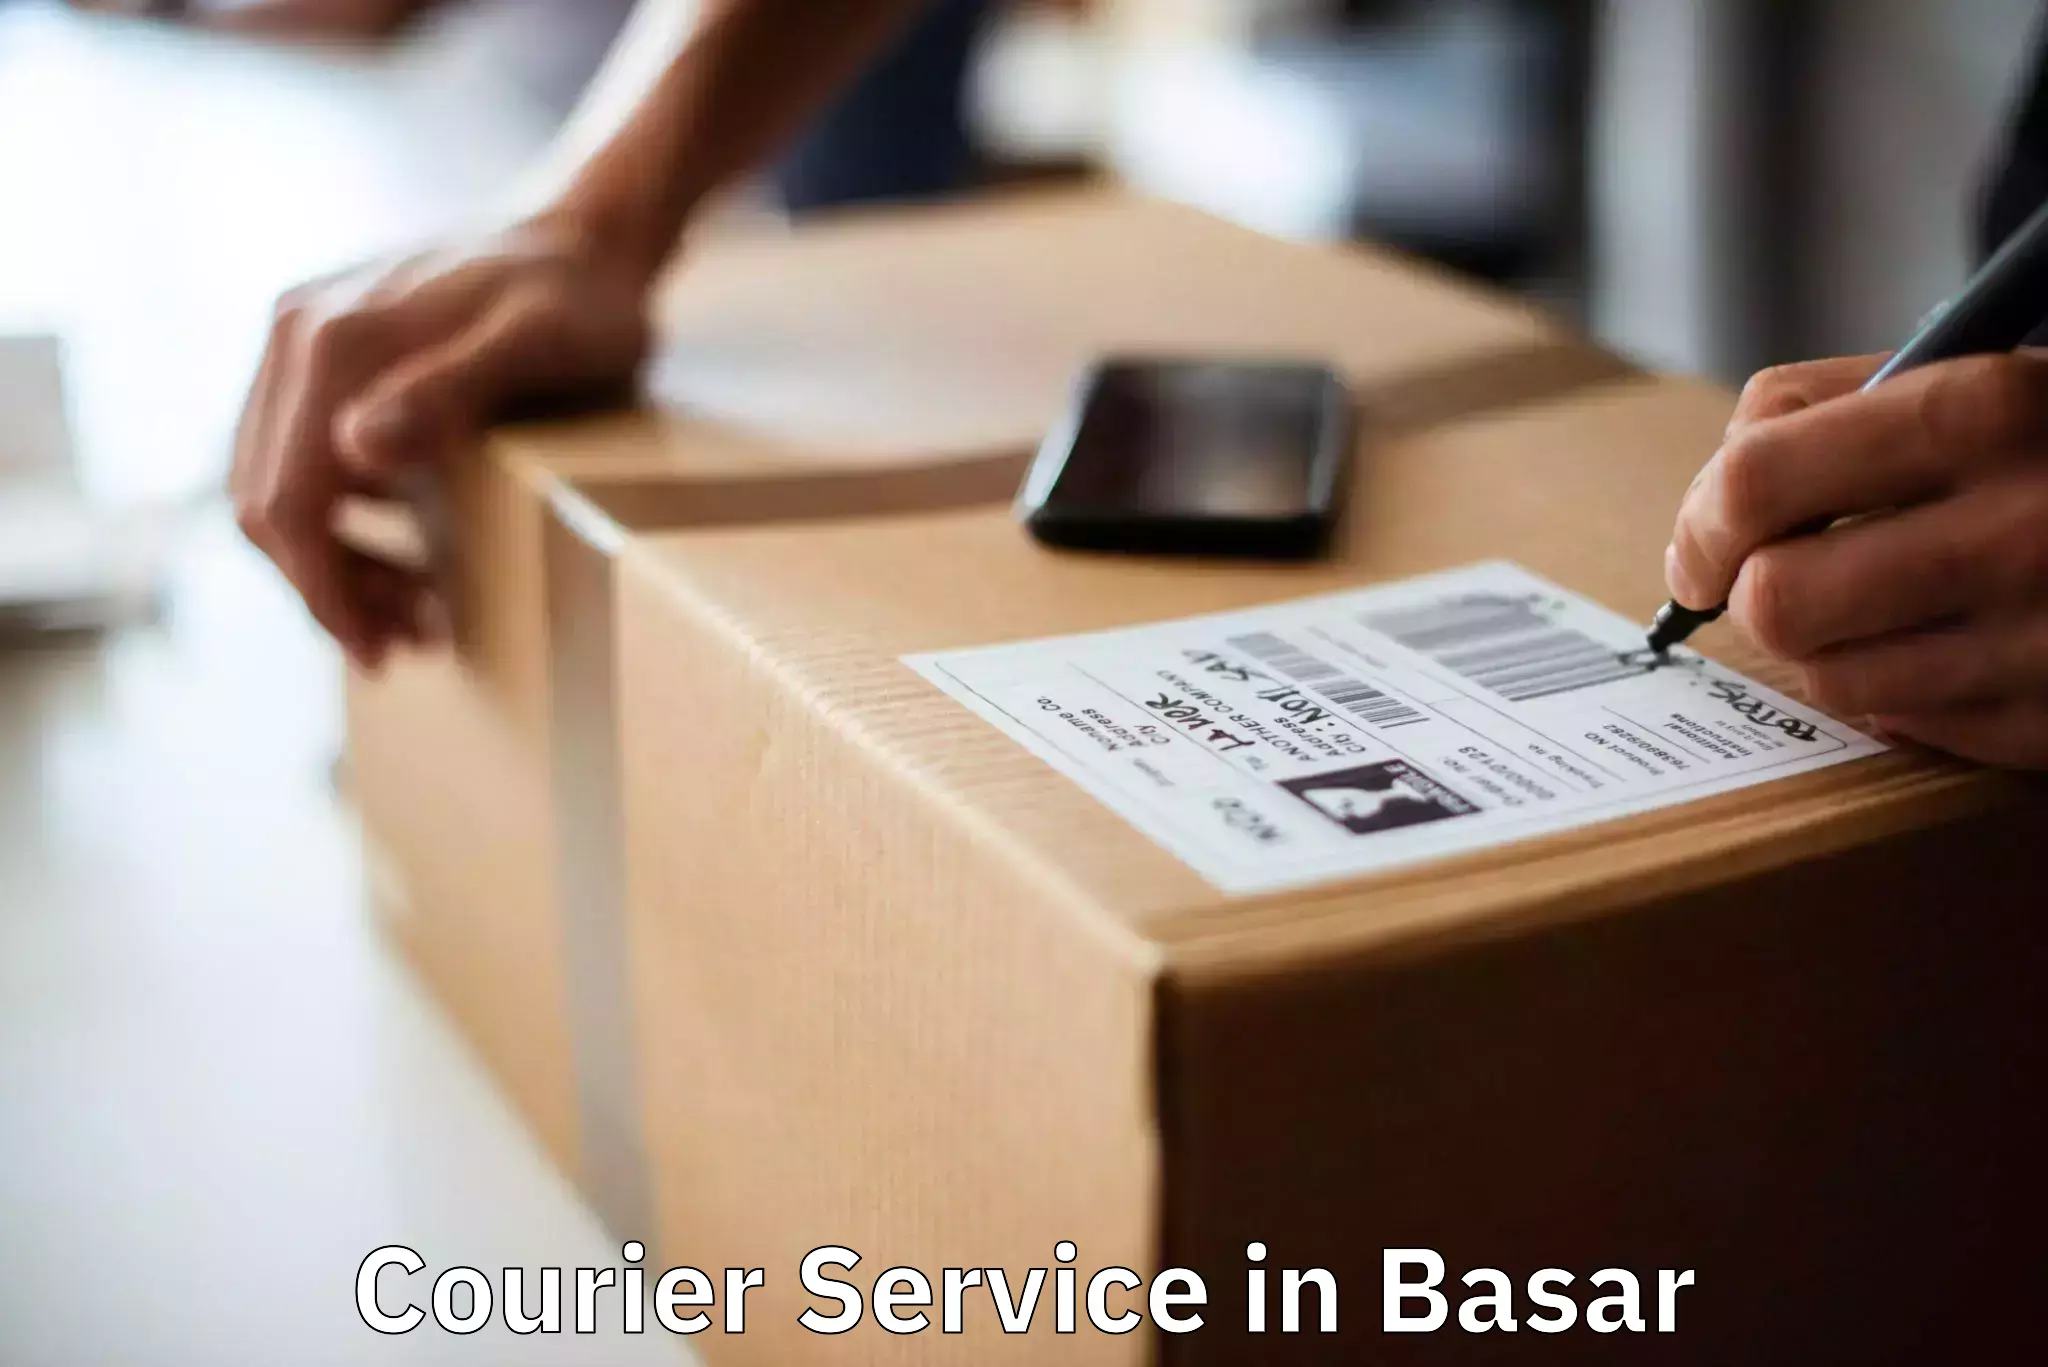 Same-day delivery options in Basar